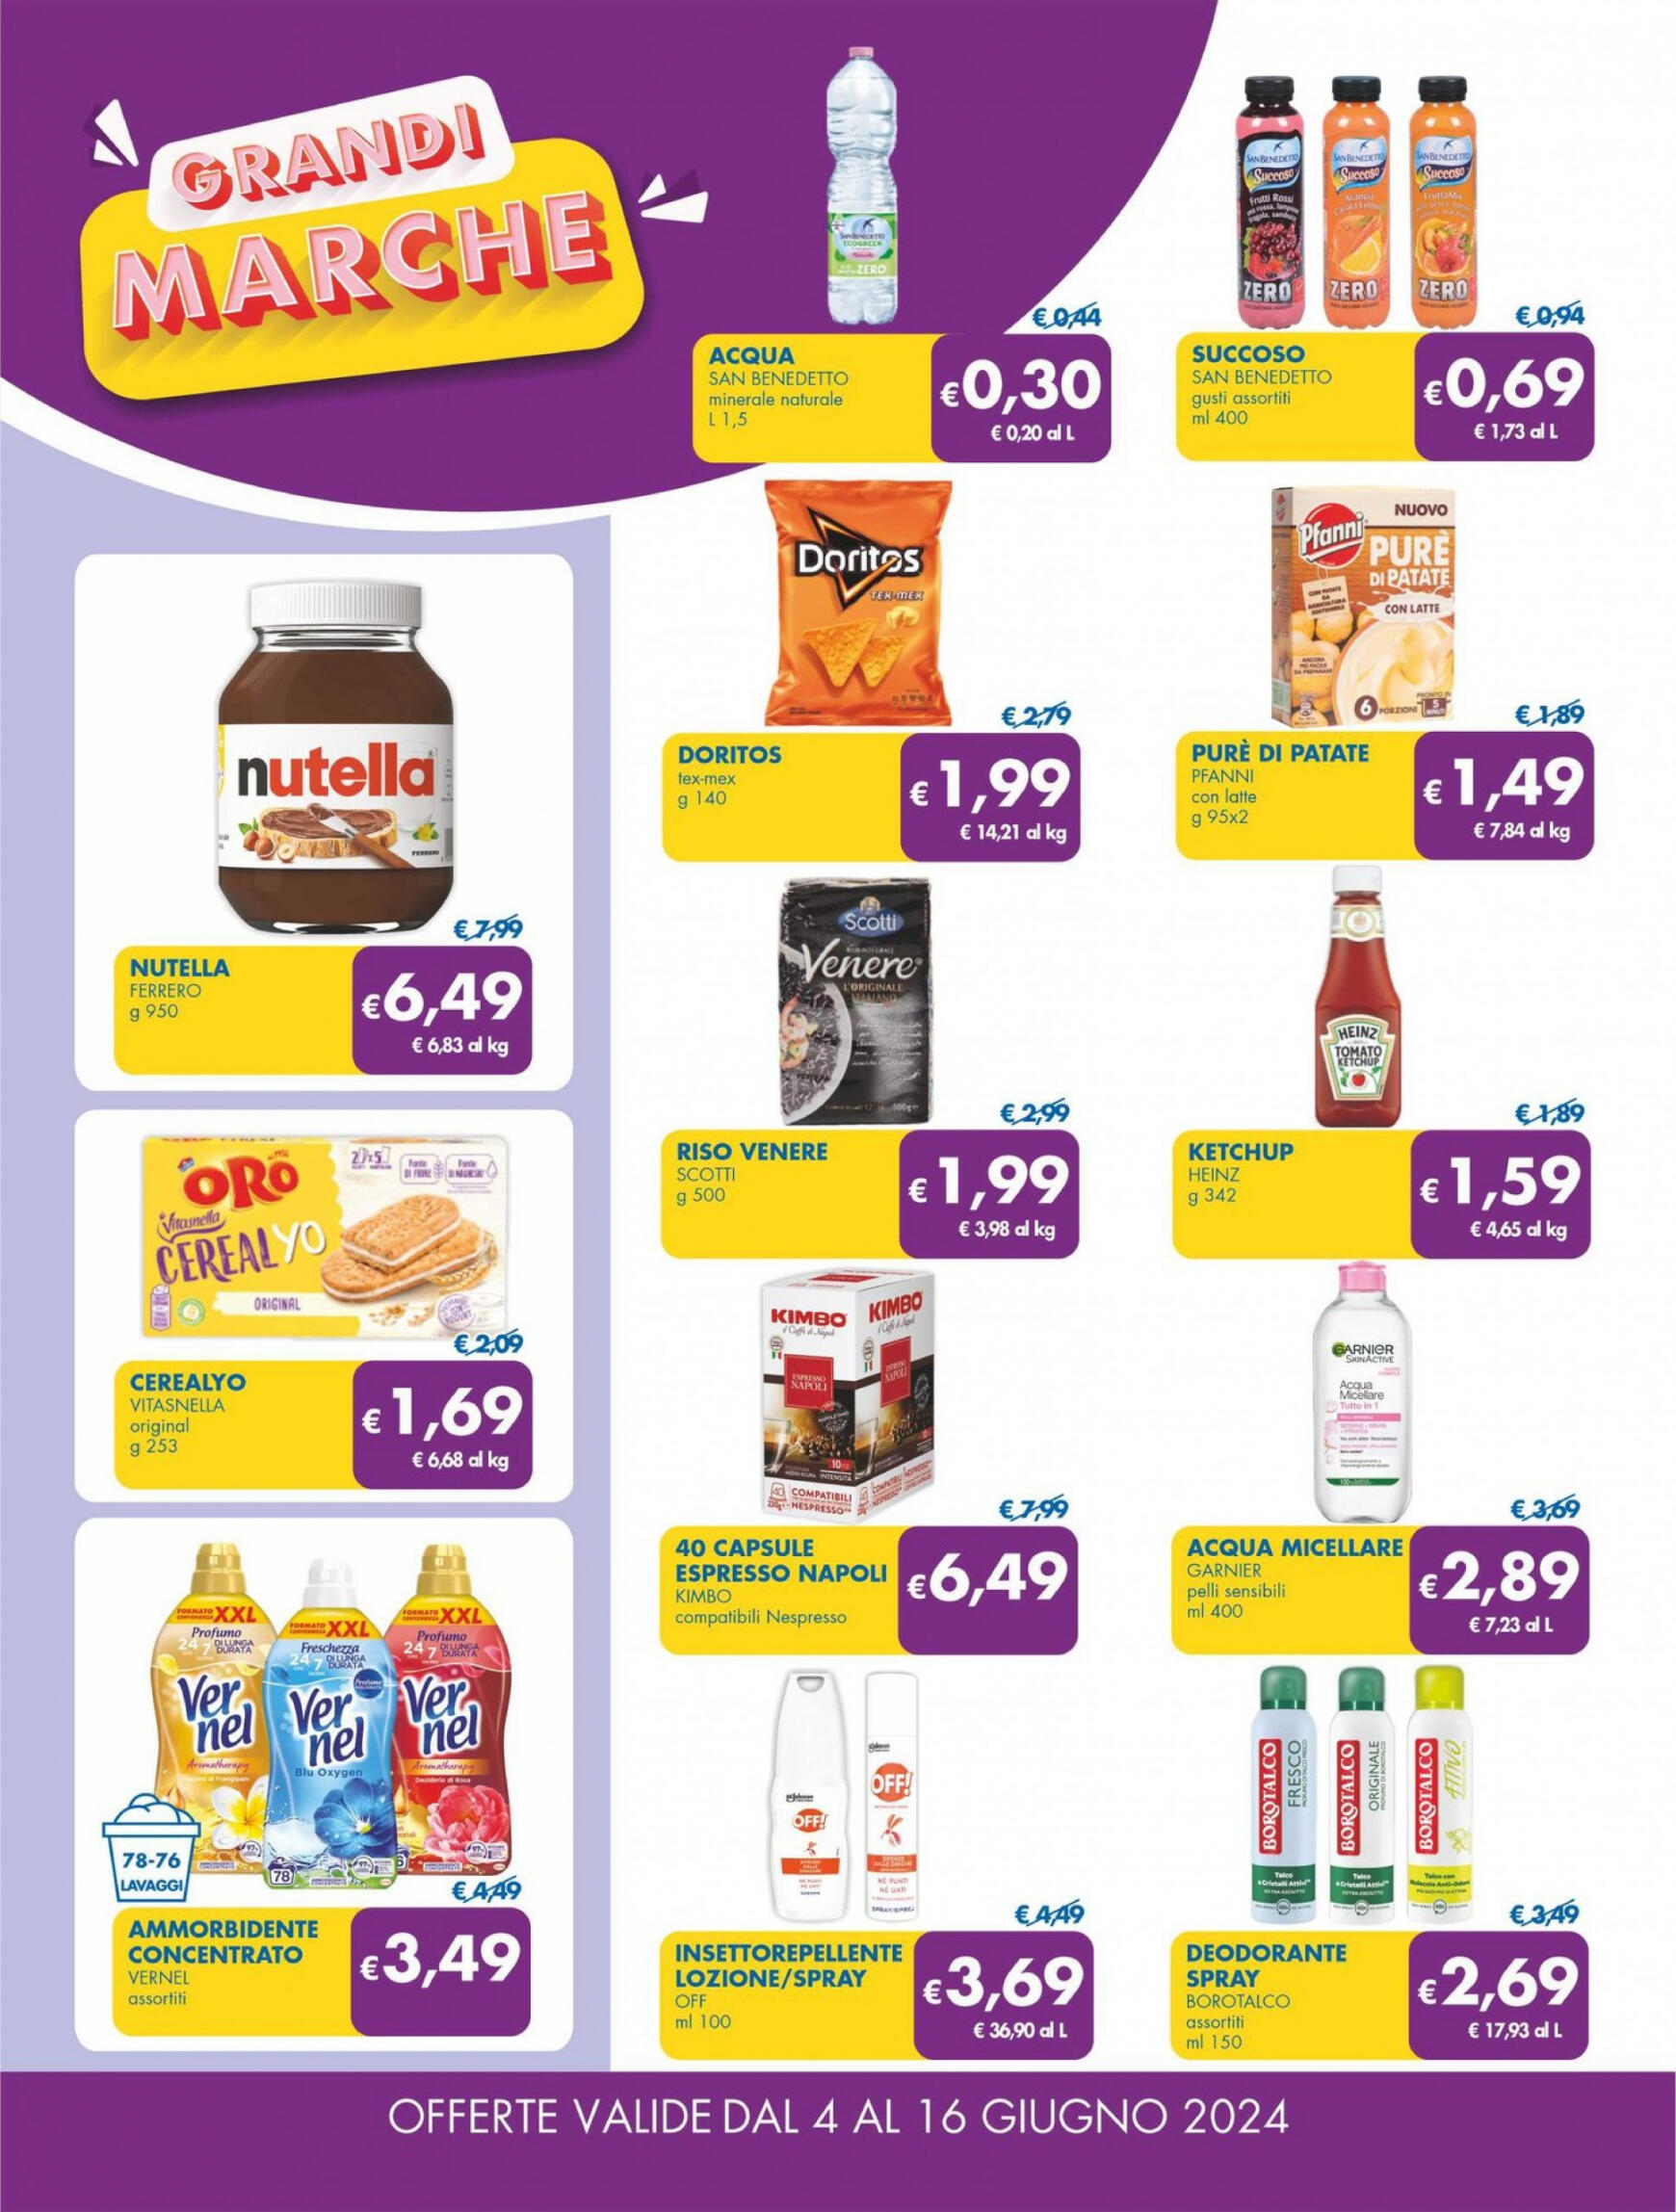 md-discount - Nuovo volantino MD 04.06. - 16.06. - page: 20